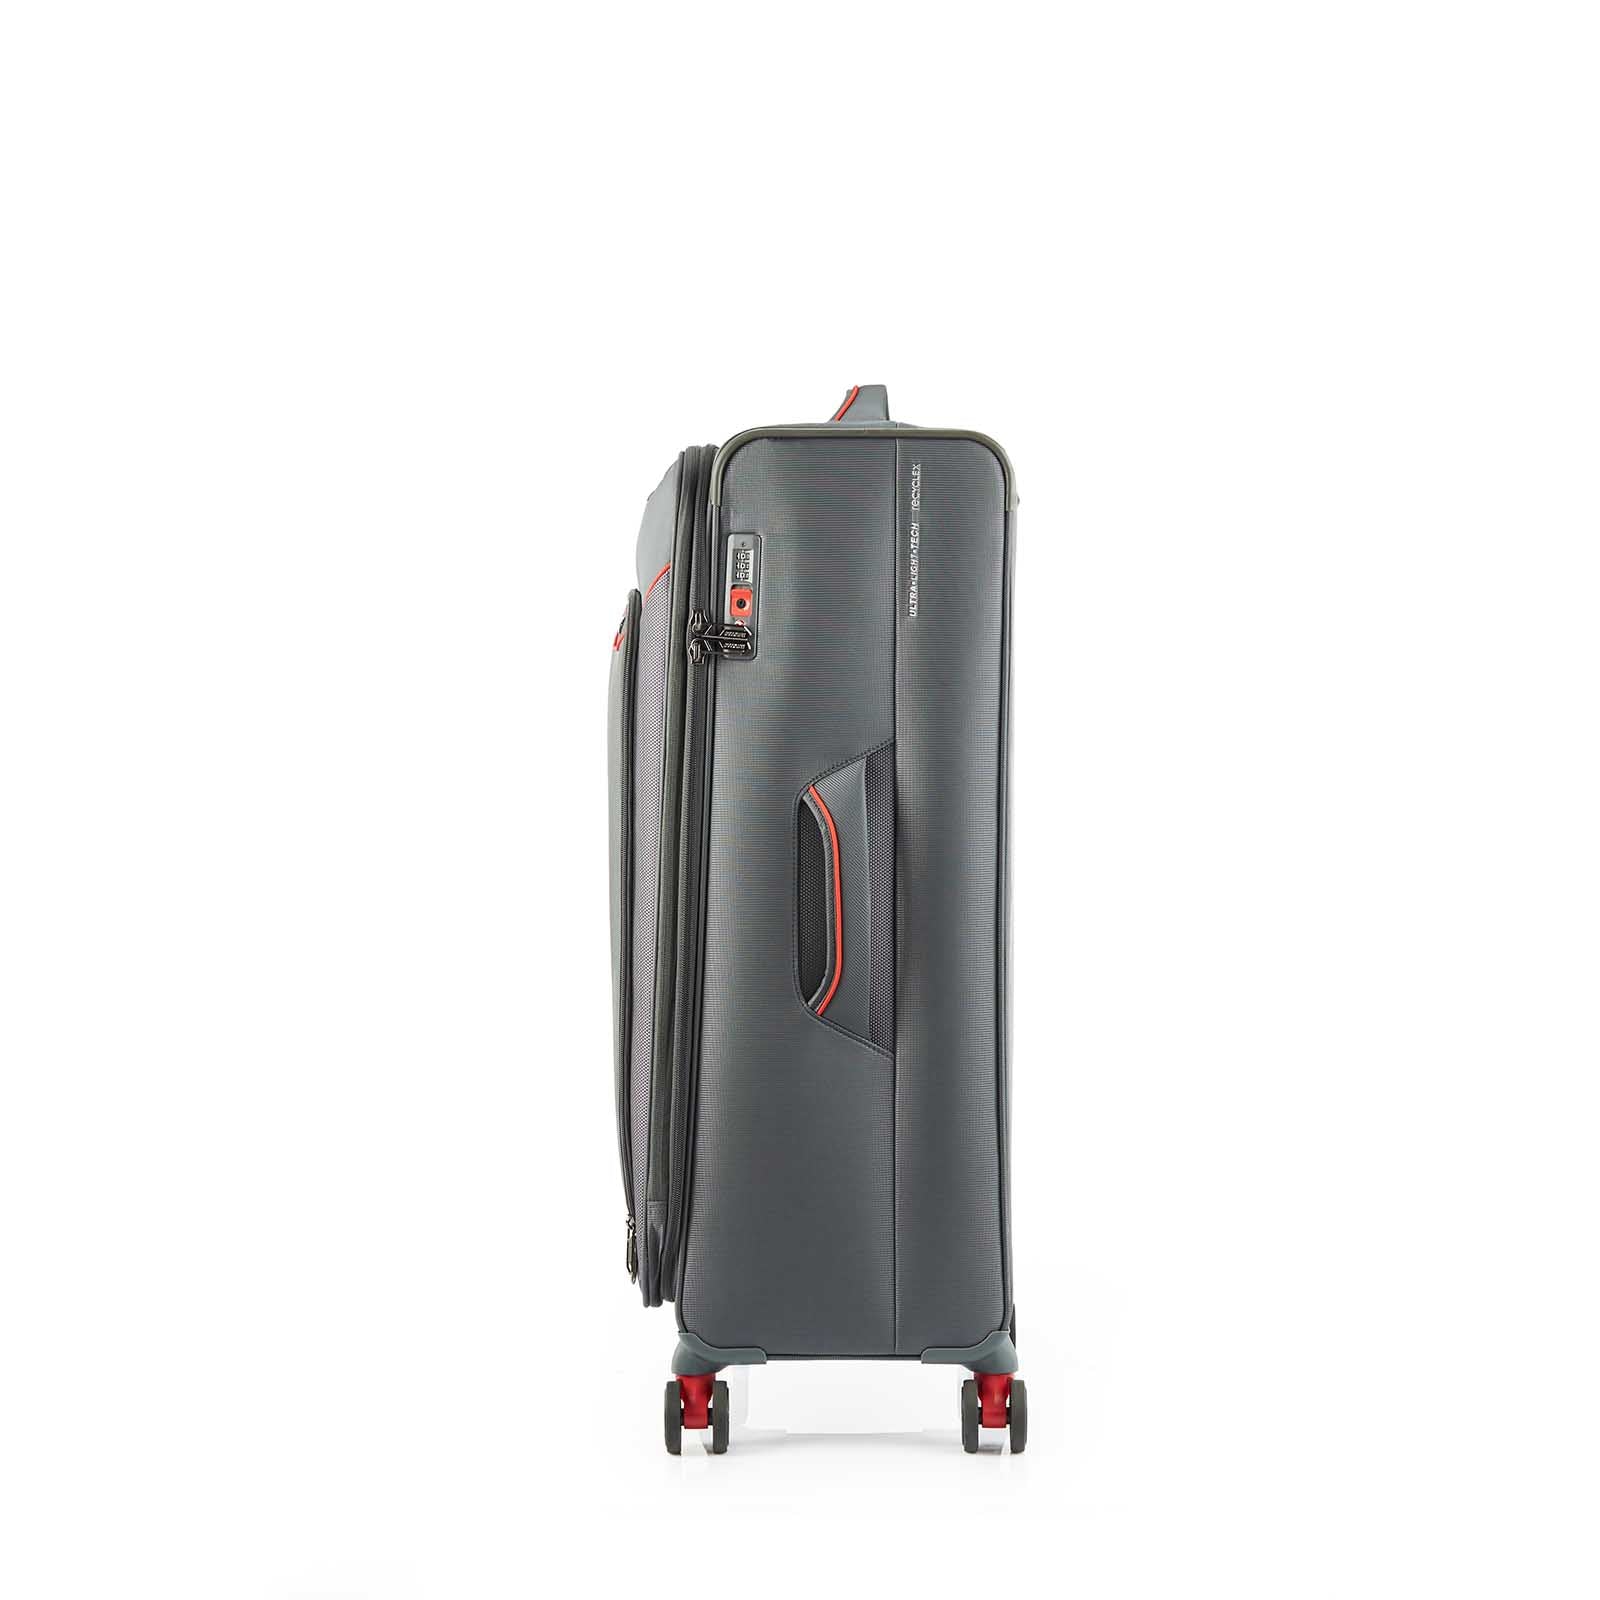 American-Tourister-Applite-4-Eco-82cm-Suitcase-Grey-Red-Side-Handle